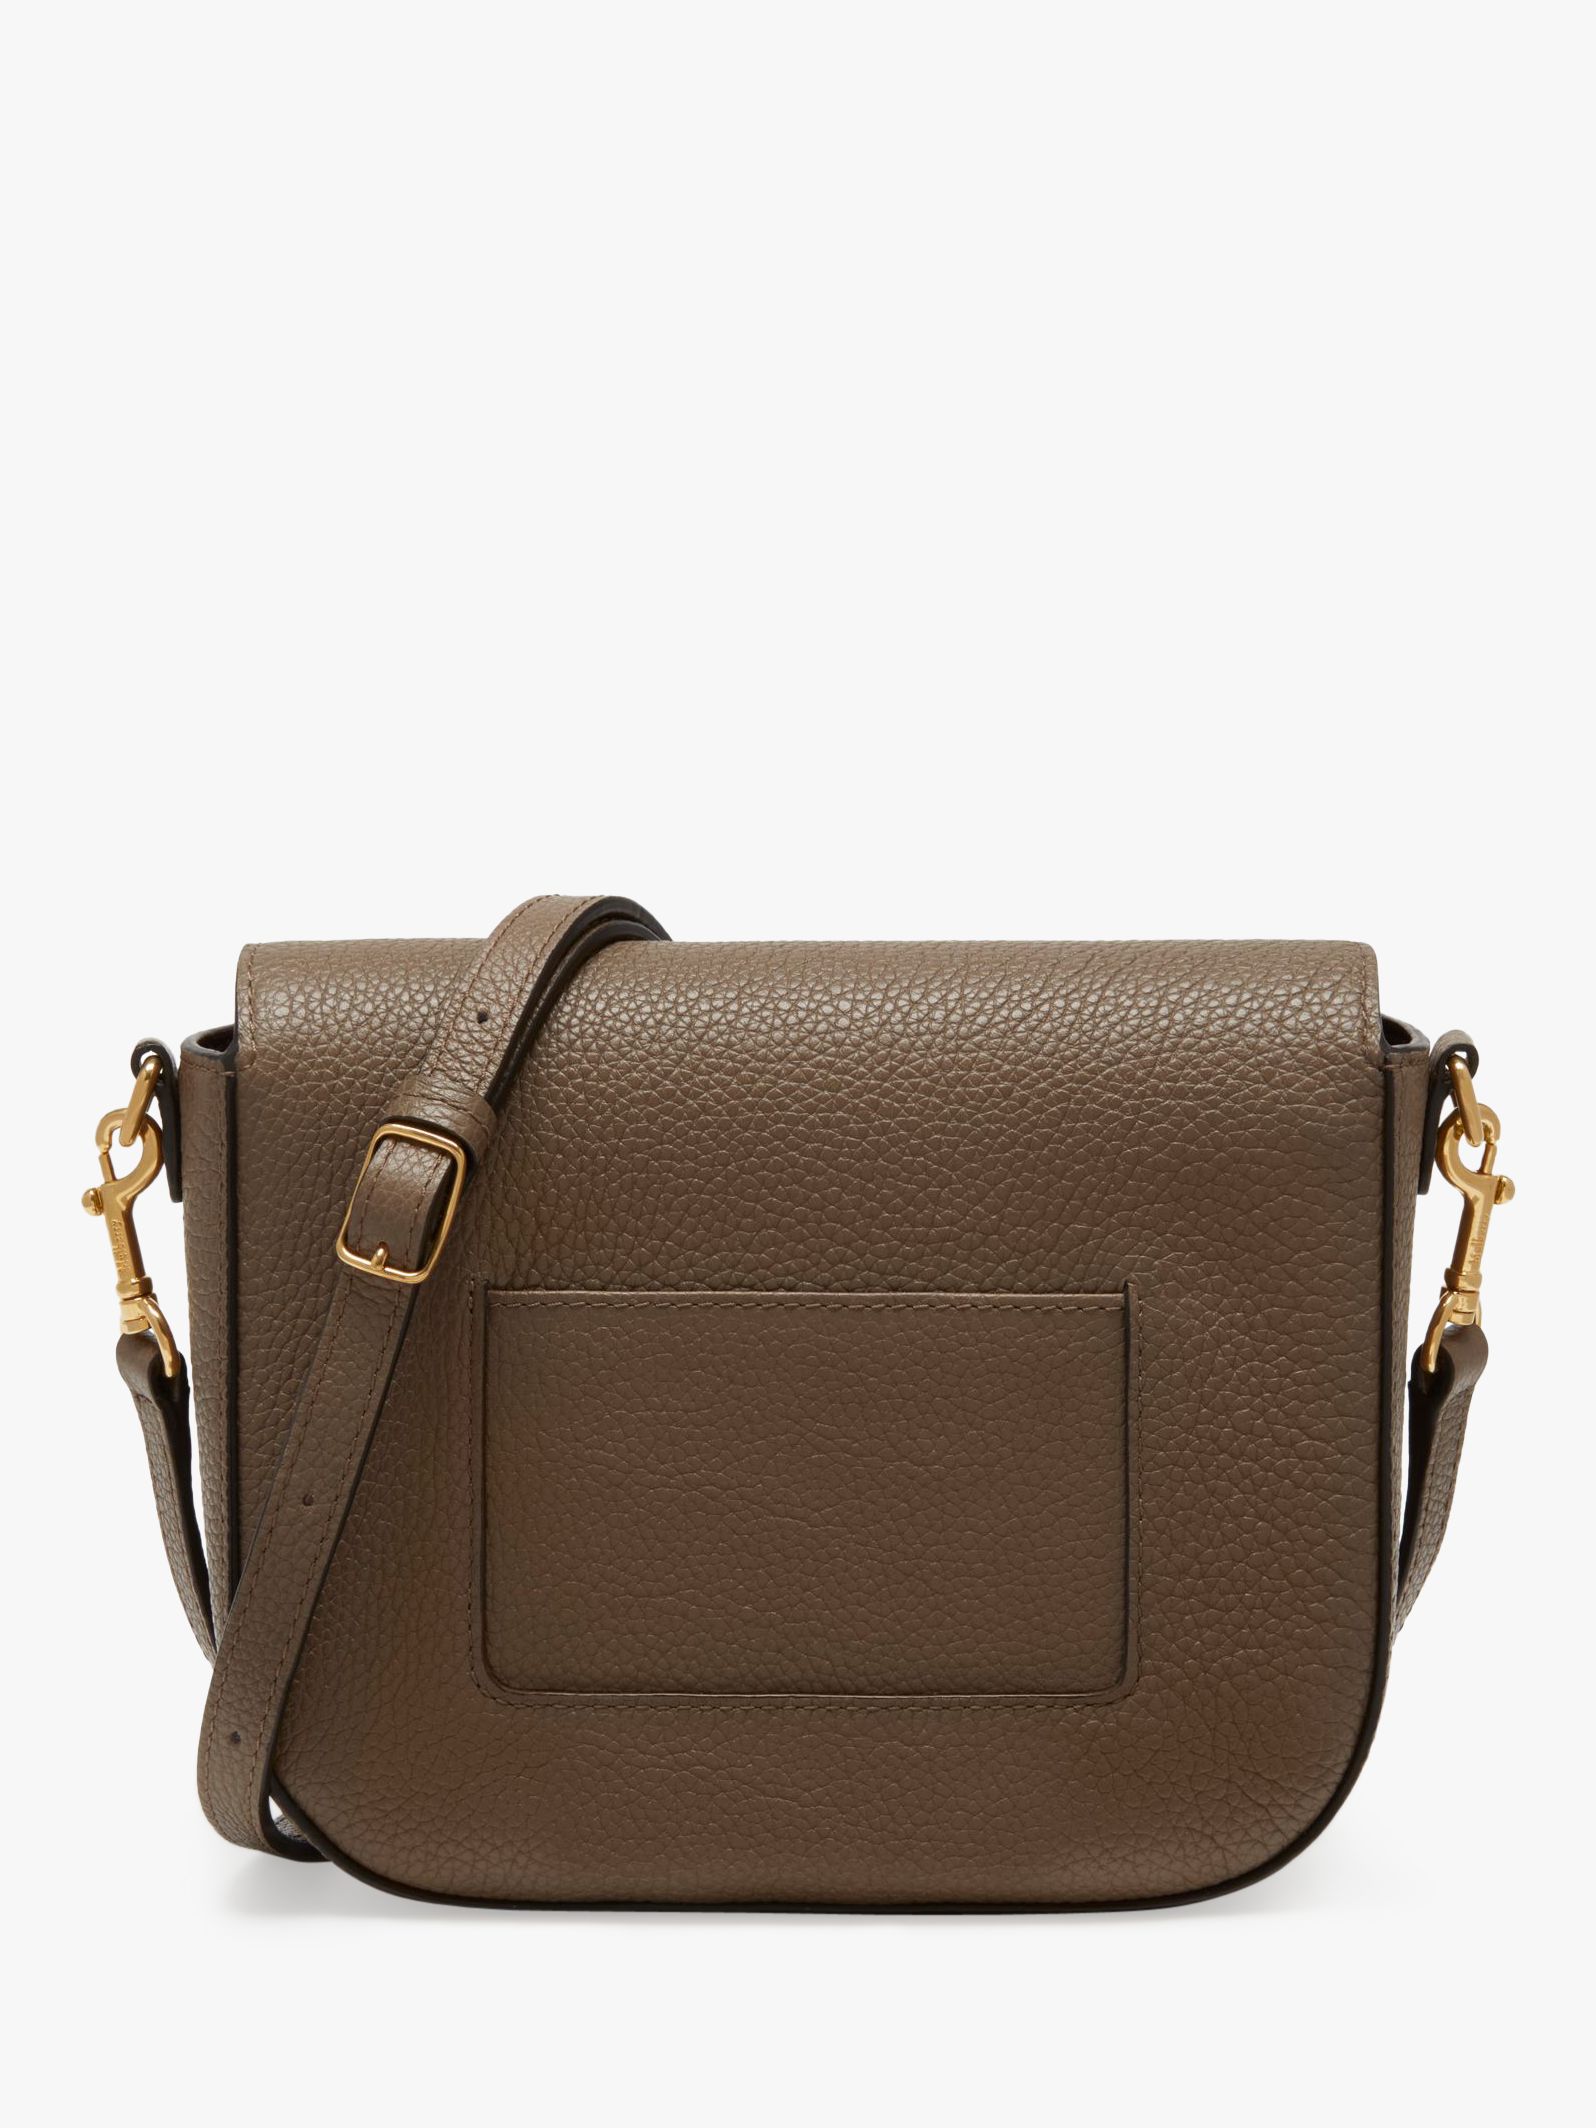 Mulbery Small Darley Classic Grain Leather Satchel Bag